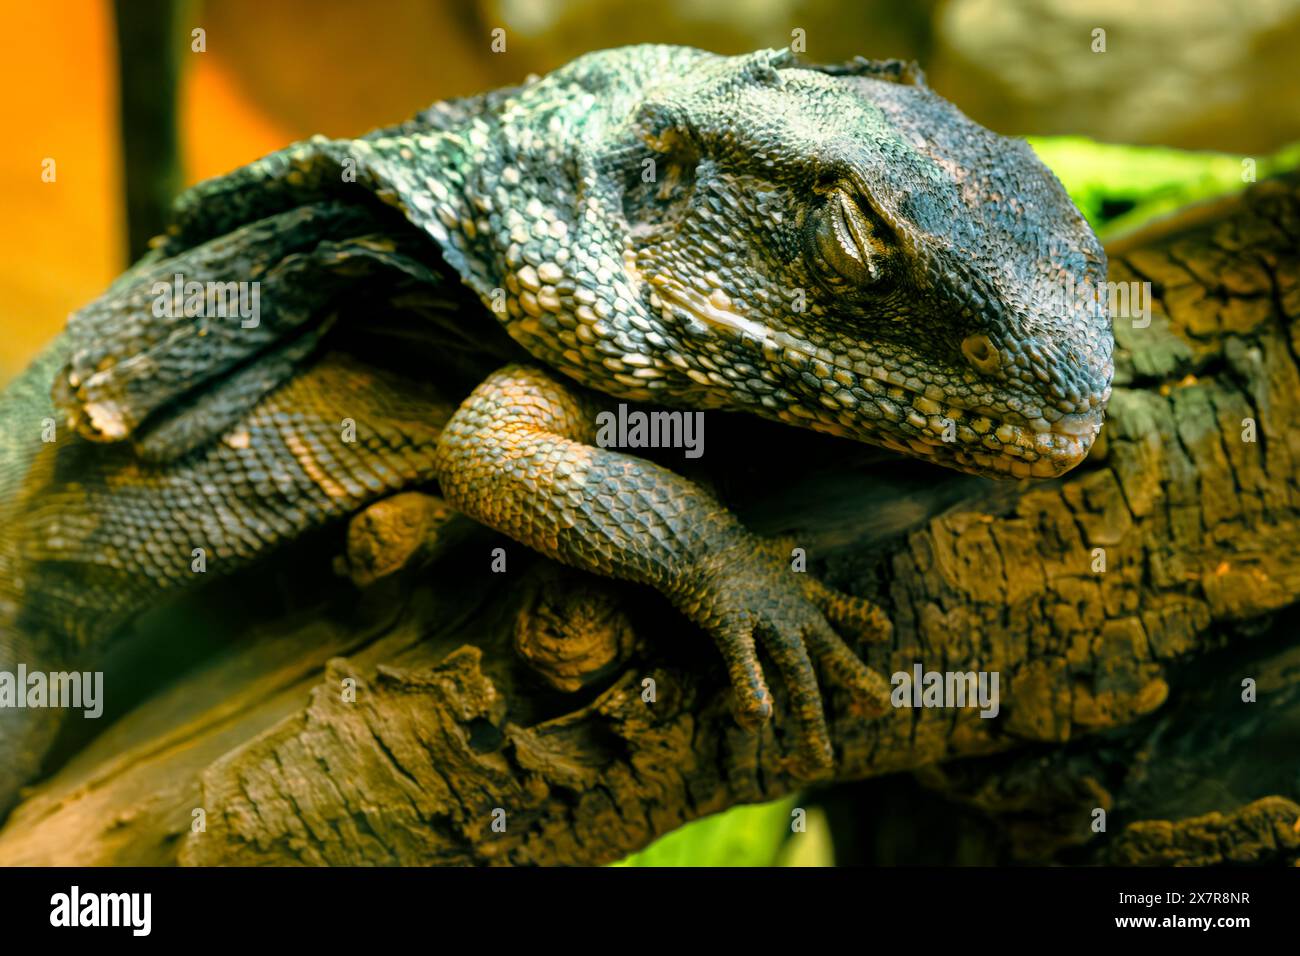 A Dragon lizard is seen resting peacefully on a tree branch. Its textured skin blends with the bark, creating a natural camouflage. Daylight highlight Stock Photo